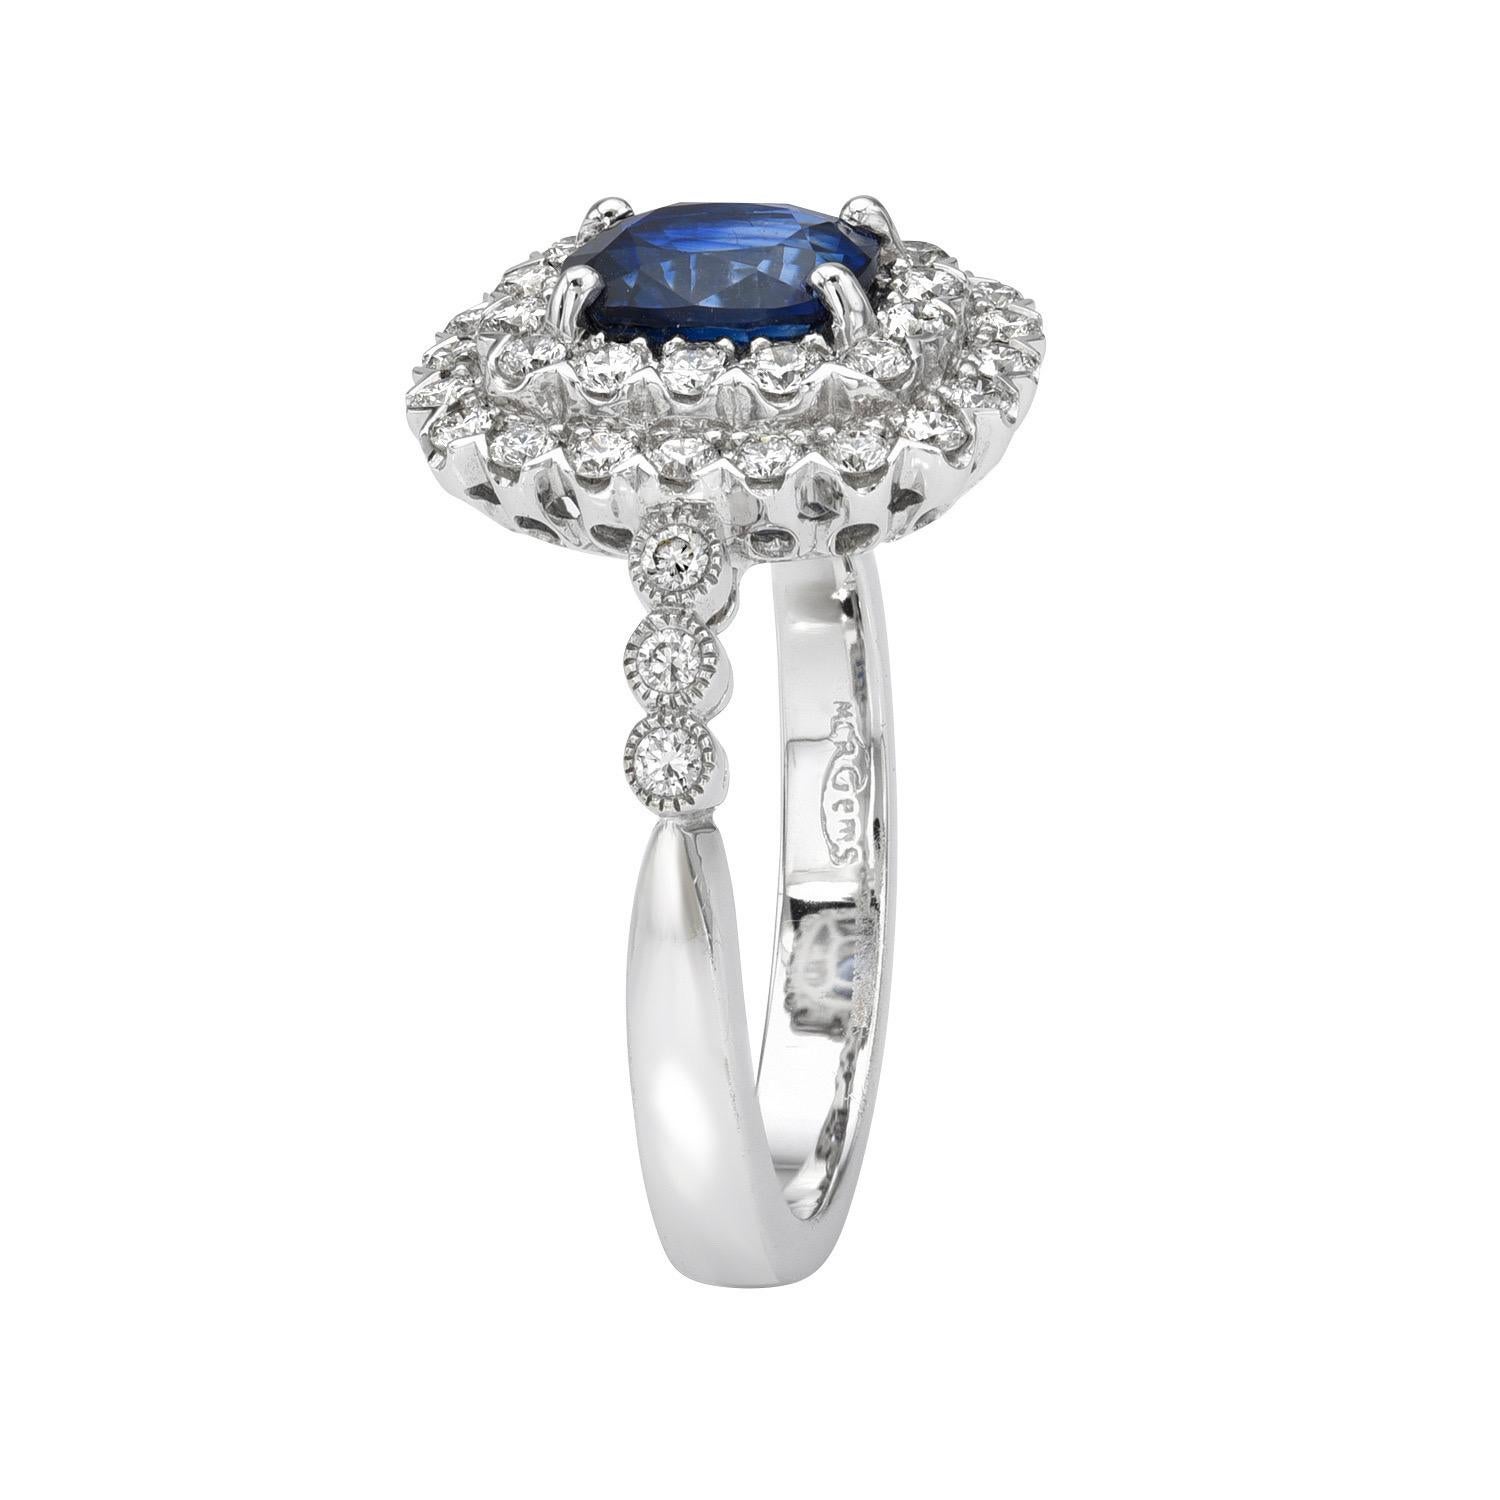 1.34 carat Royal Blue Sapphire cushion 18K white gold ring, decorated with round brilliant diamonds totaling 0.42 carats.
Ring size 6.5. Resizing is complementary upon request.
Returns are accepted and paid by us within 7 days of delivery.